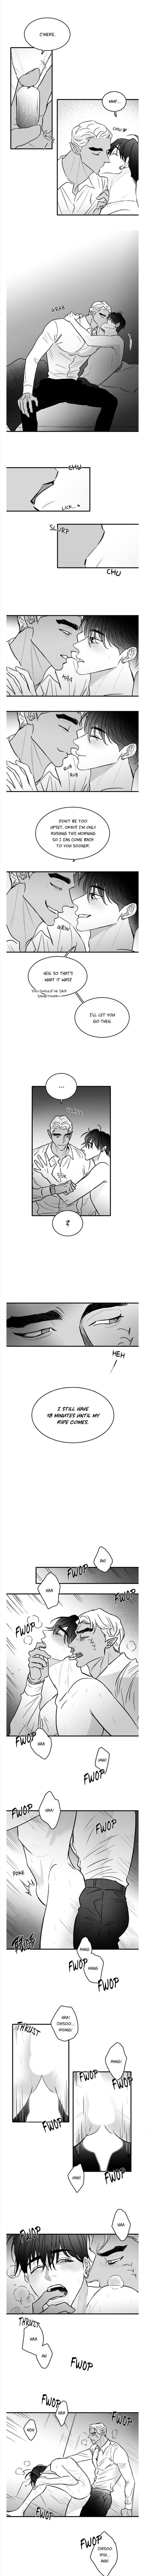 Bound To Be Fools - Page 2